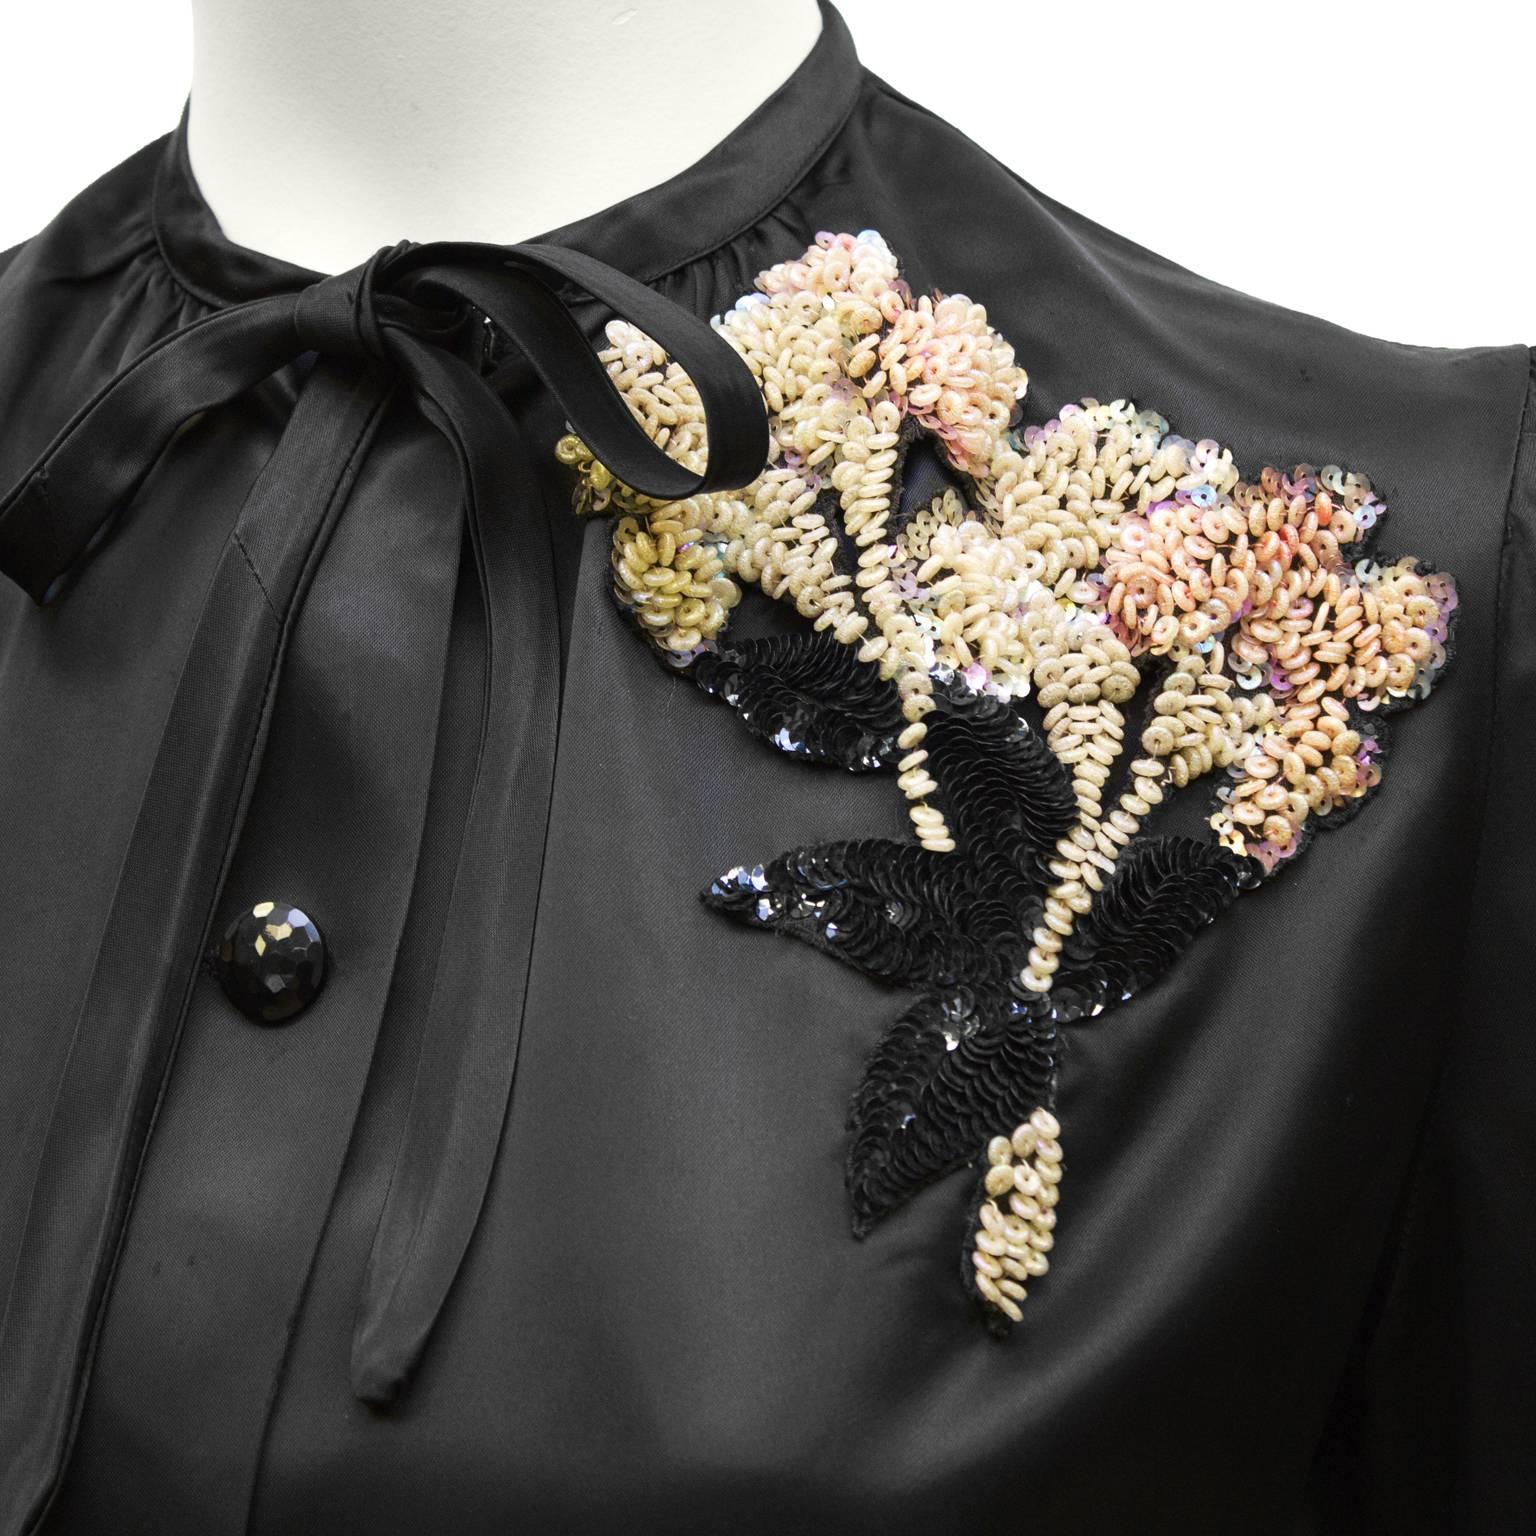 Women's 1940's Anonymous Black Satin Blouse With Beaded Flower